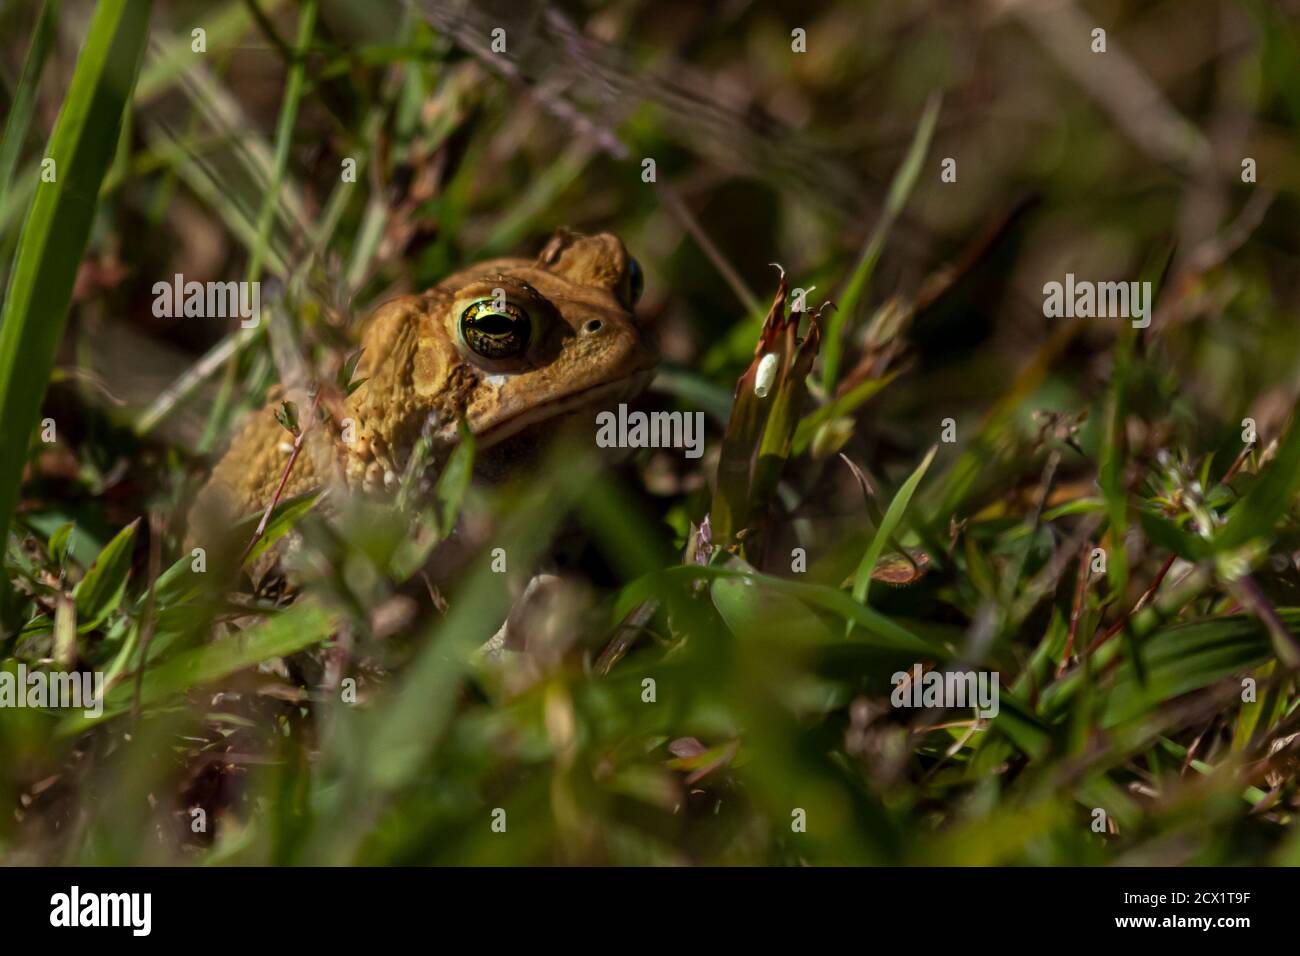 image of an Eastern American toad (anaxyrus americanus americanus) a native amphibian found in eastern USA and Canada. This brown warty toad is seen o Stock Photo